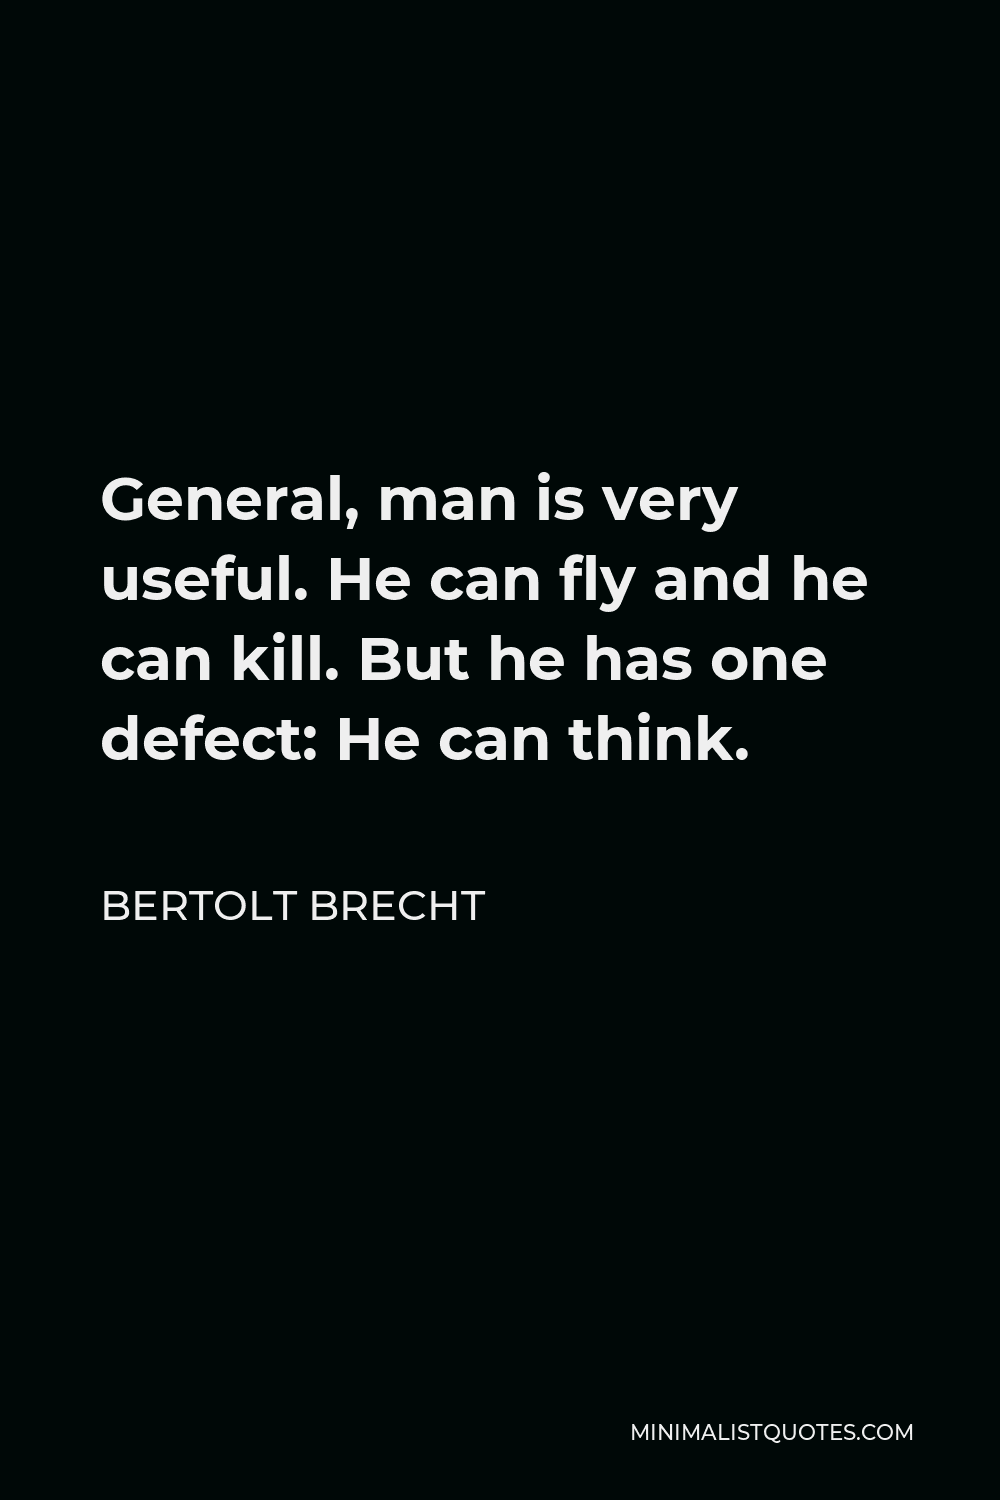 Bertolt Brecht Quote - General, man is very useful. He can fly and he can kill. But he has one defect: He can think.